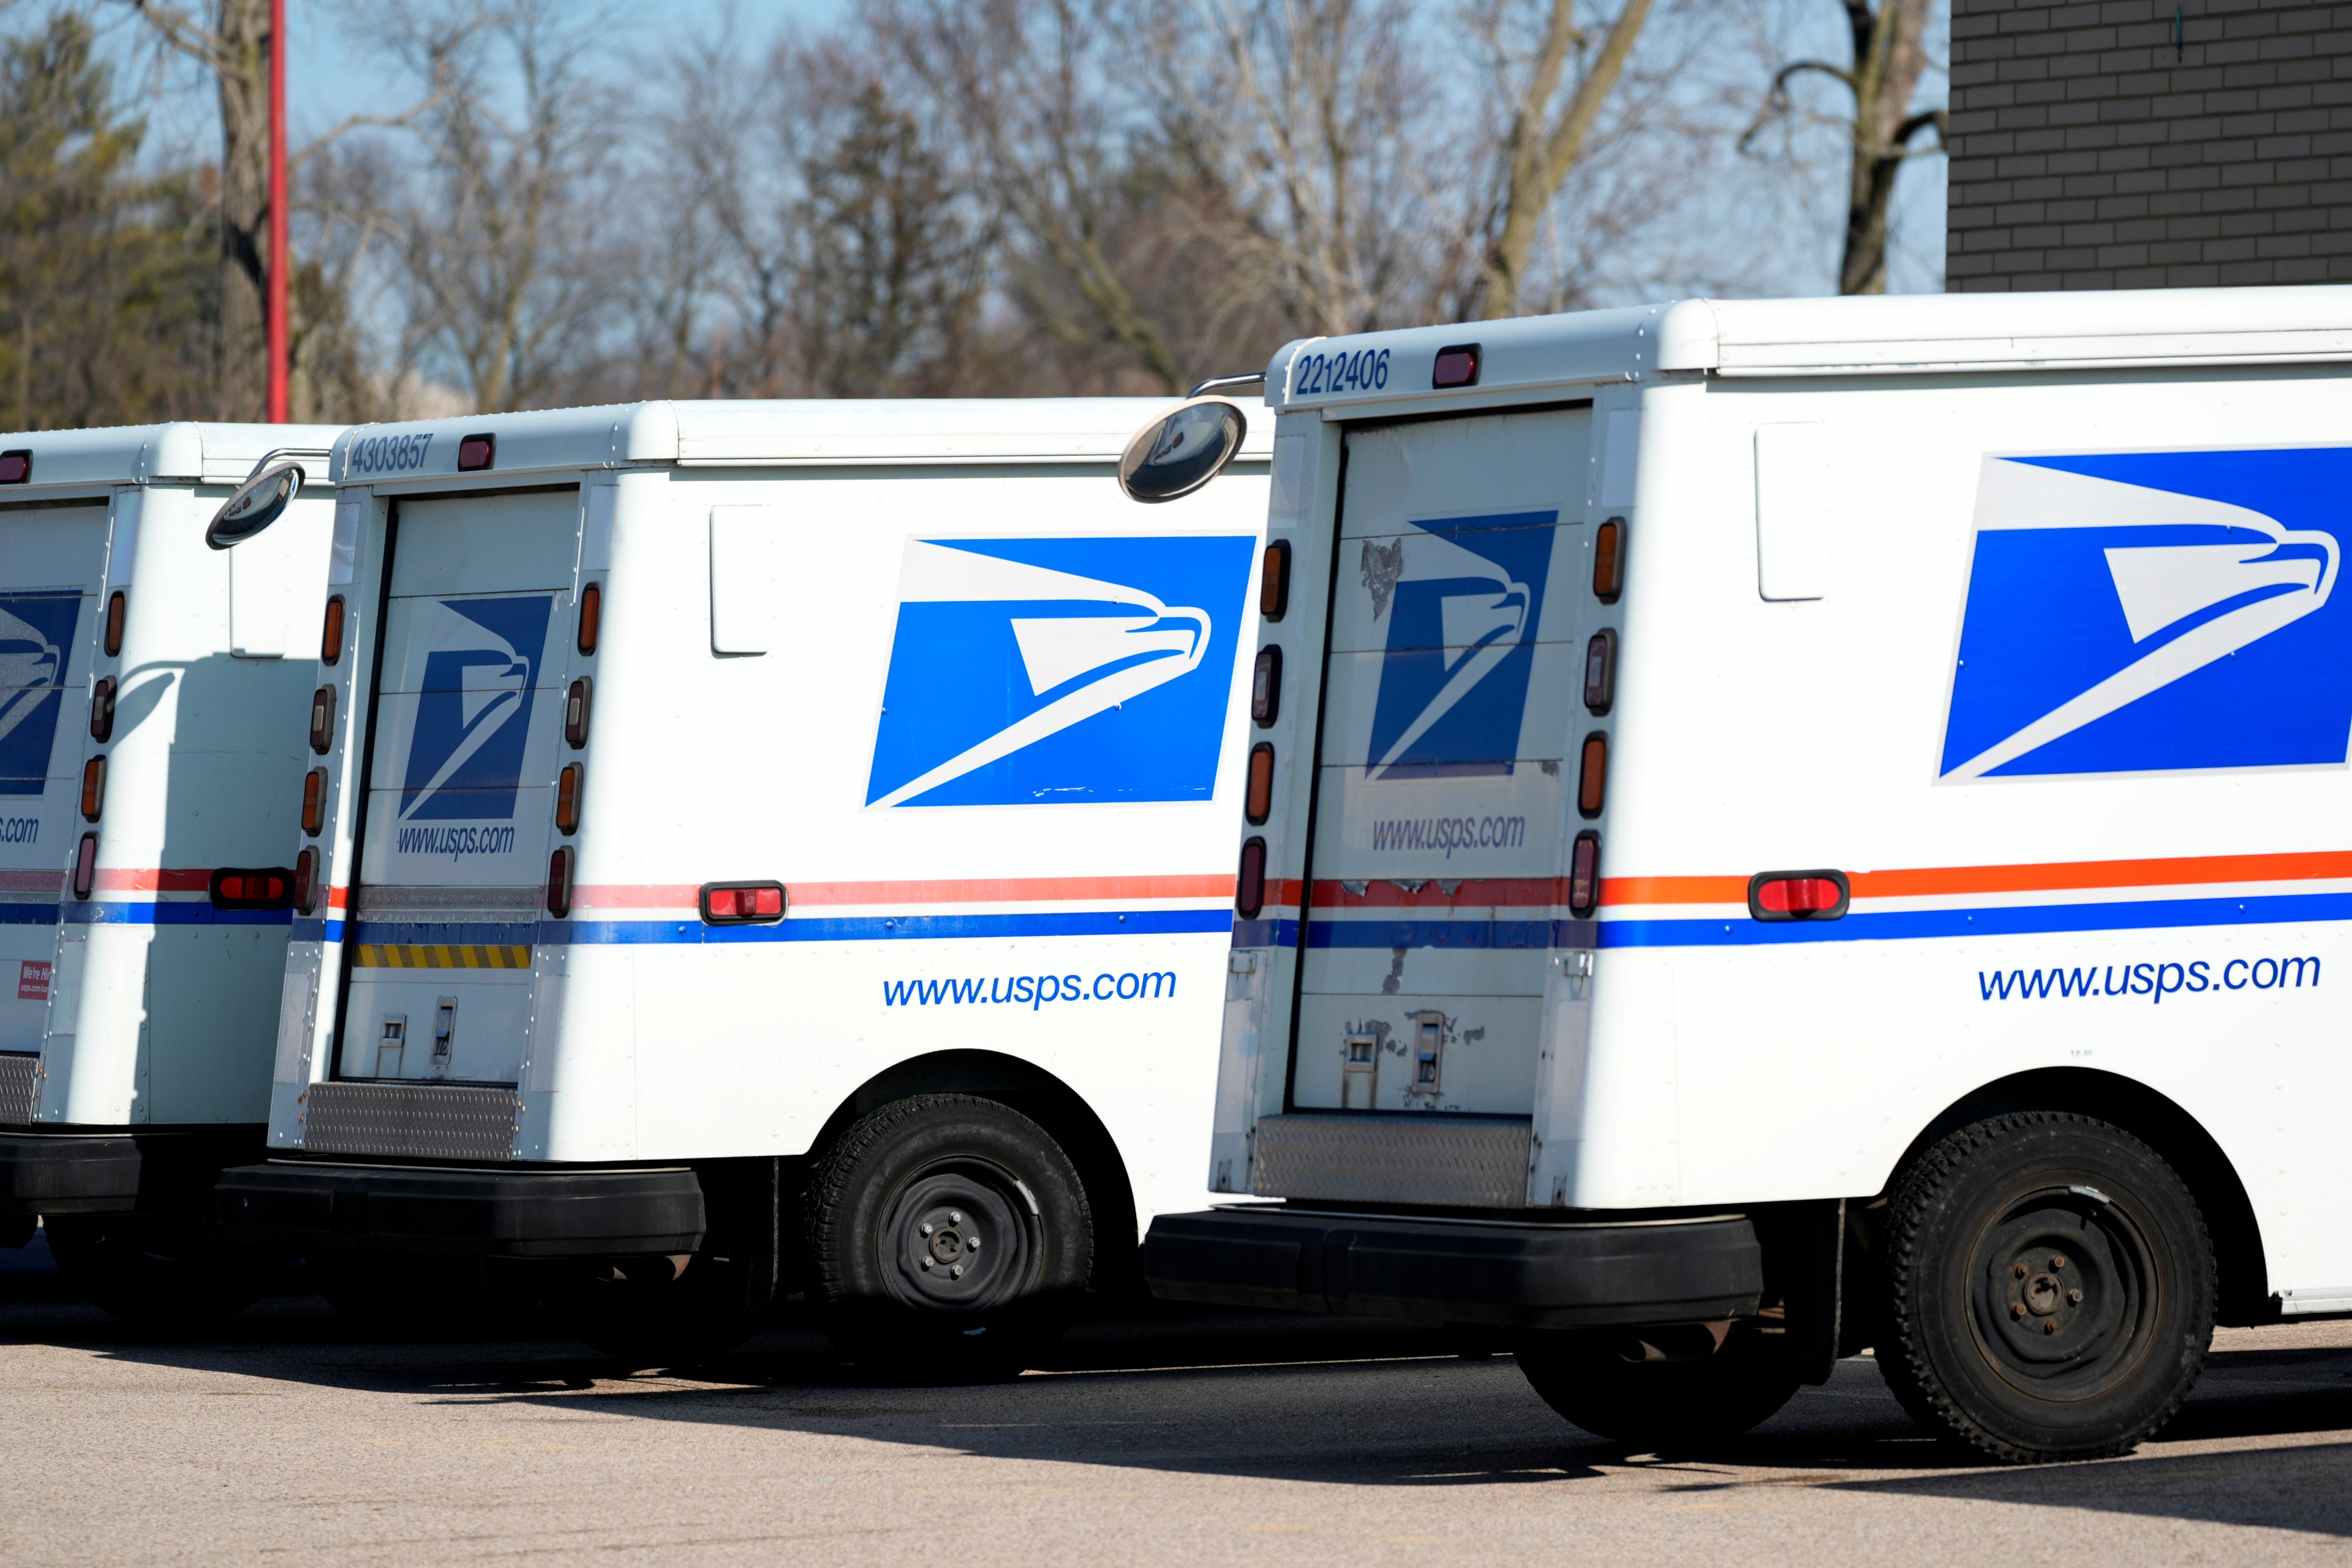 A row of USPS mail delivery trucks parked side-by-side.